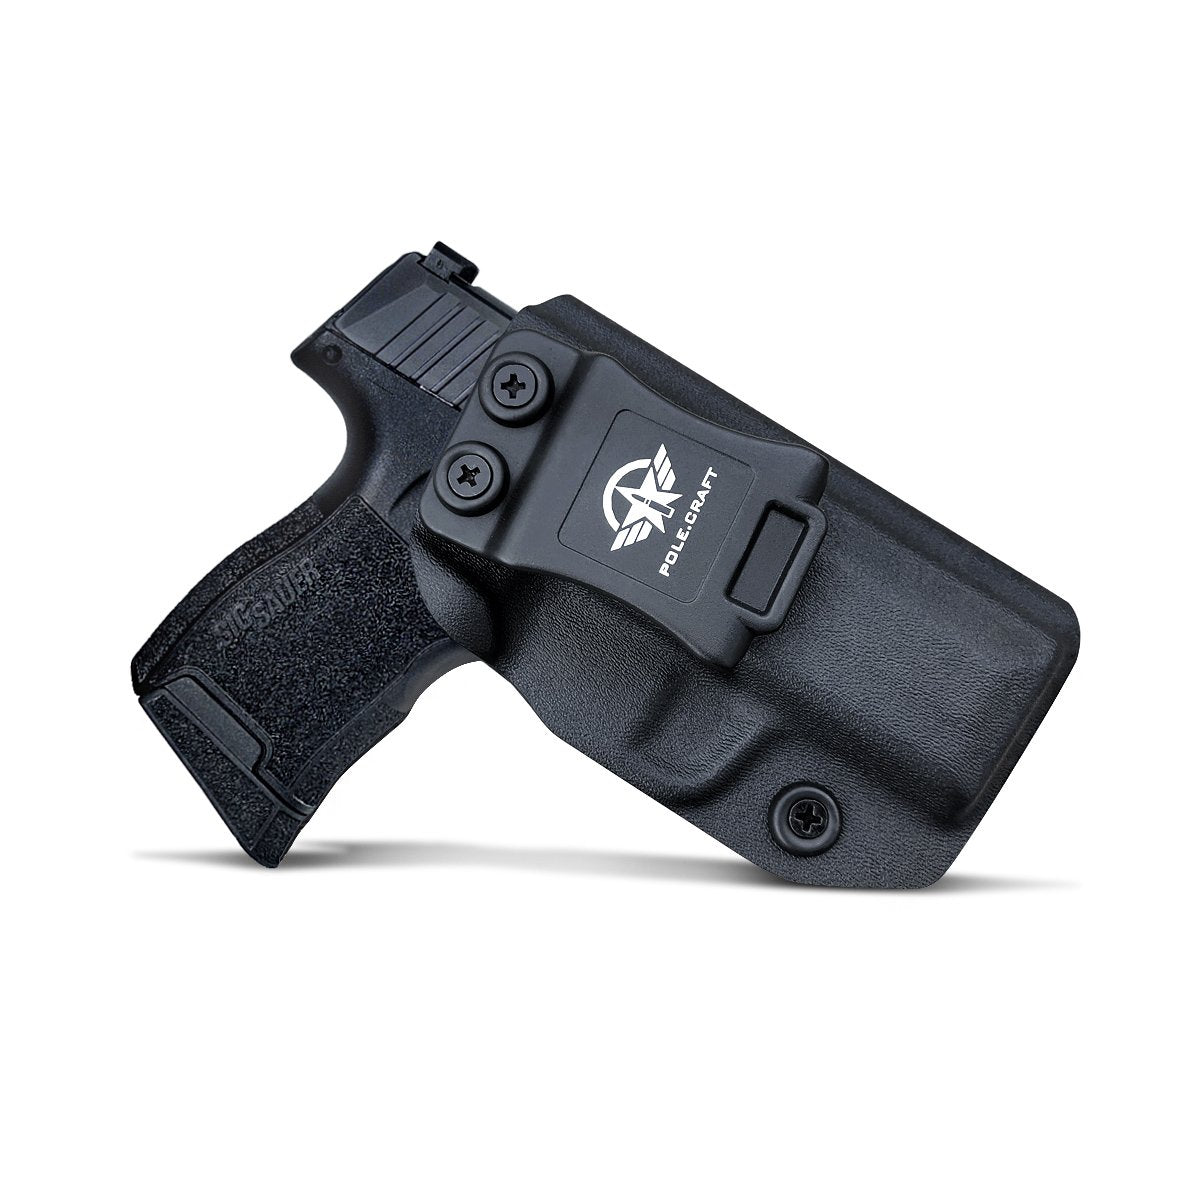 Sig P365 Holster IWB Kydex for Sauer P365 Holsters Concealed Carry - Kydex IWB Holster for Sig P365 Accessories - IWB Concealed Holster Sig 365 Case Pocket (Black, Right /